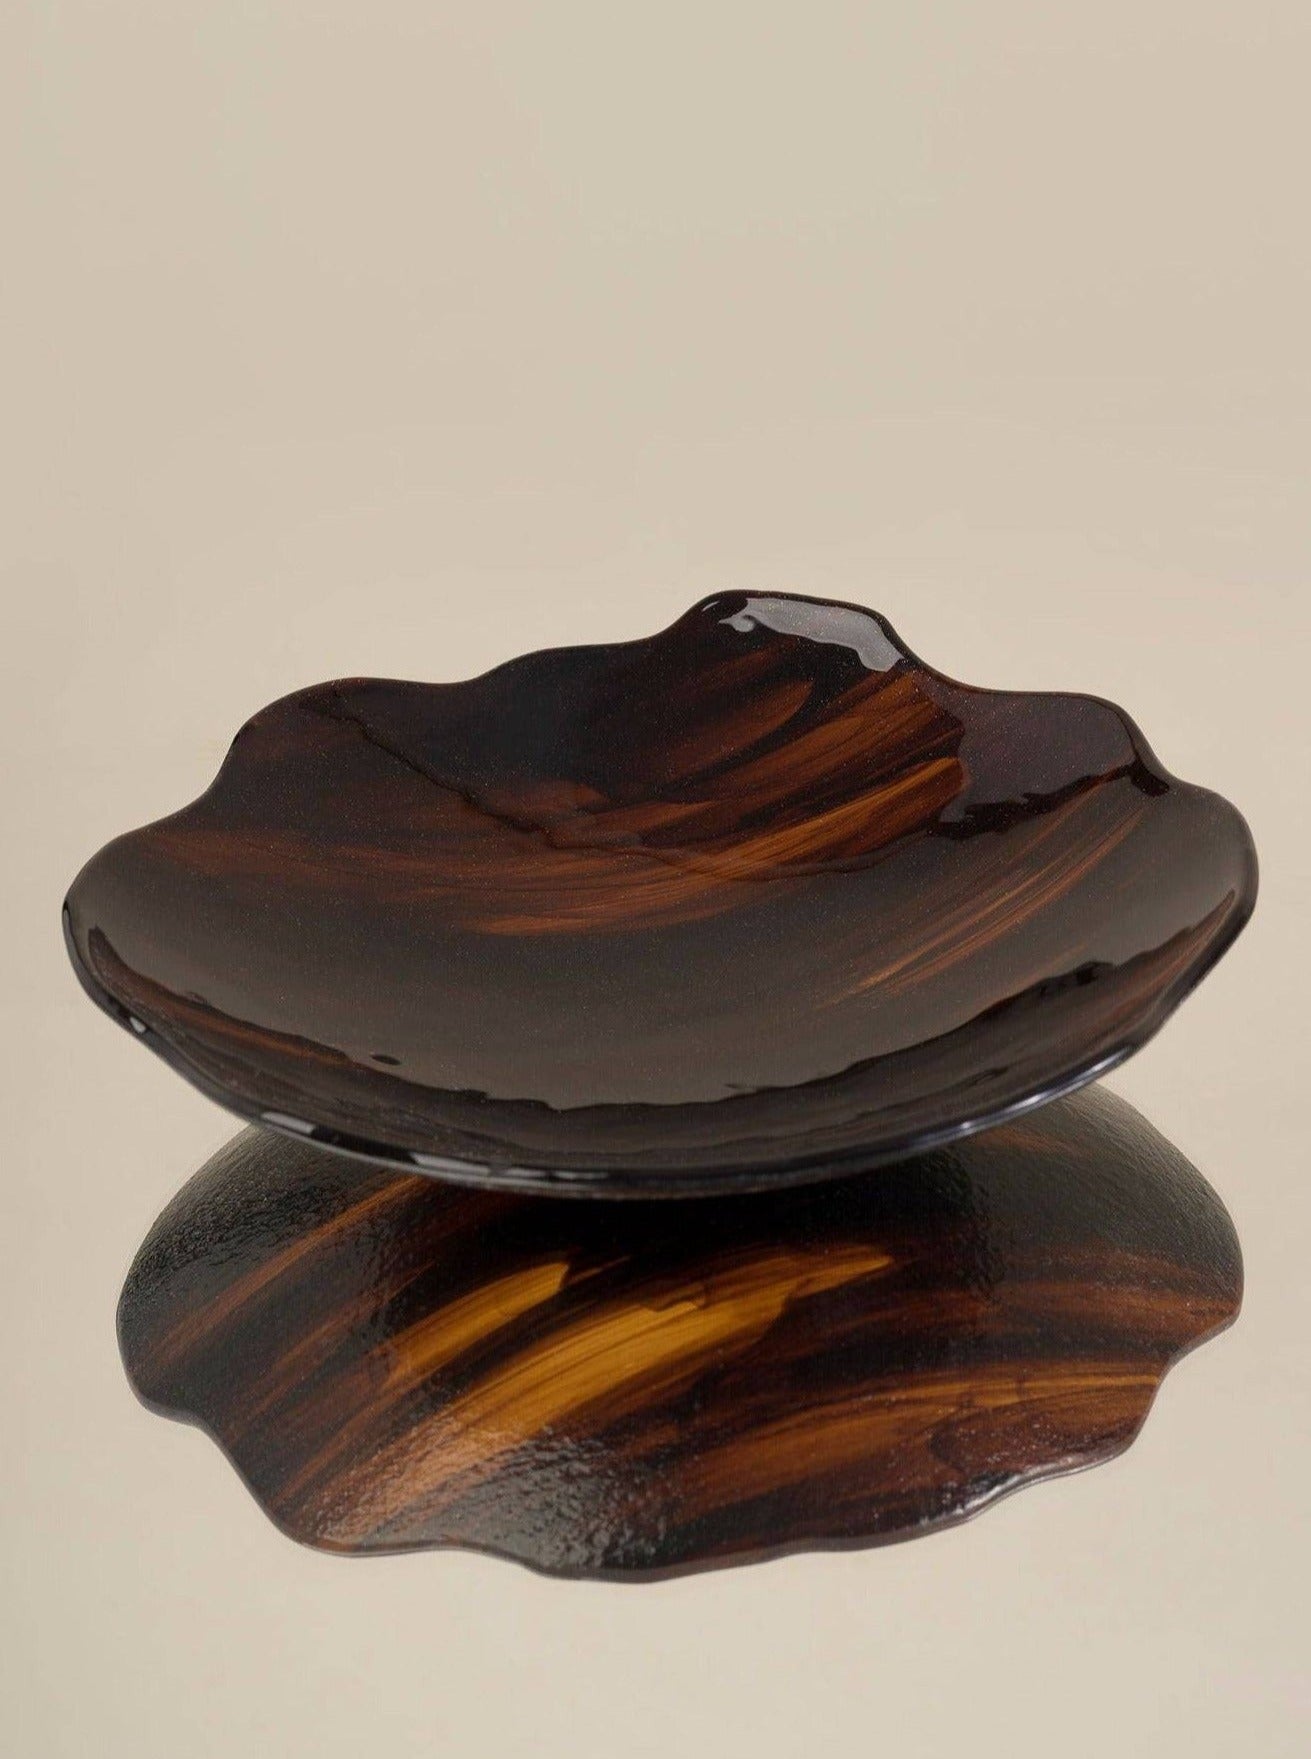 A dark-brown, swirling, wood-grain patterned Plate Carey Fig vessel on a light beige background, casting a reflective shadow from Los Objetos Decorativos.